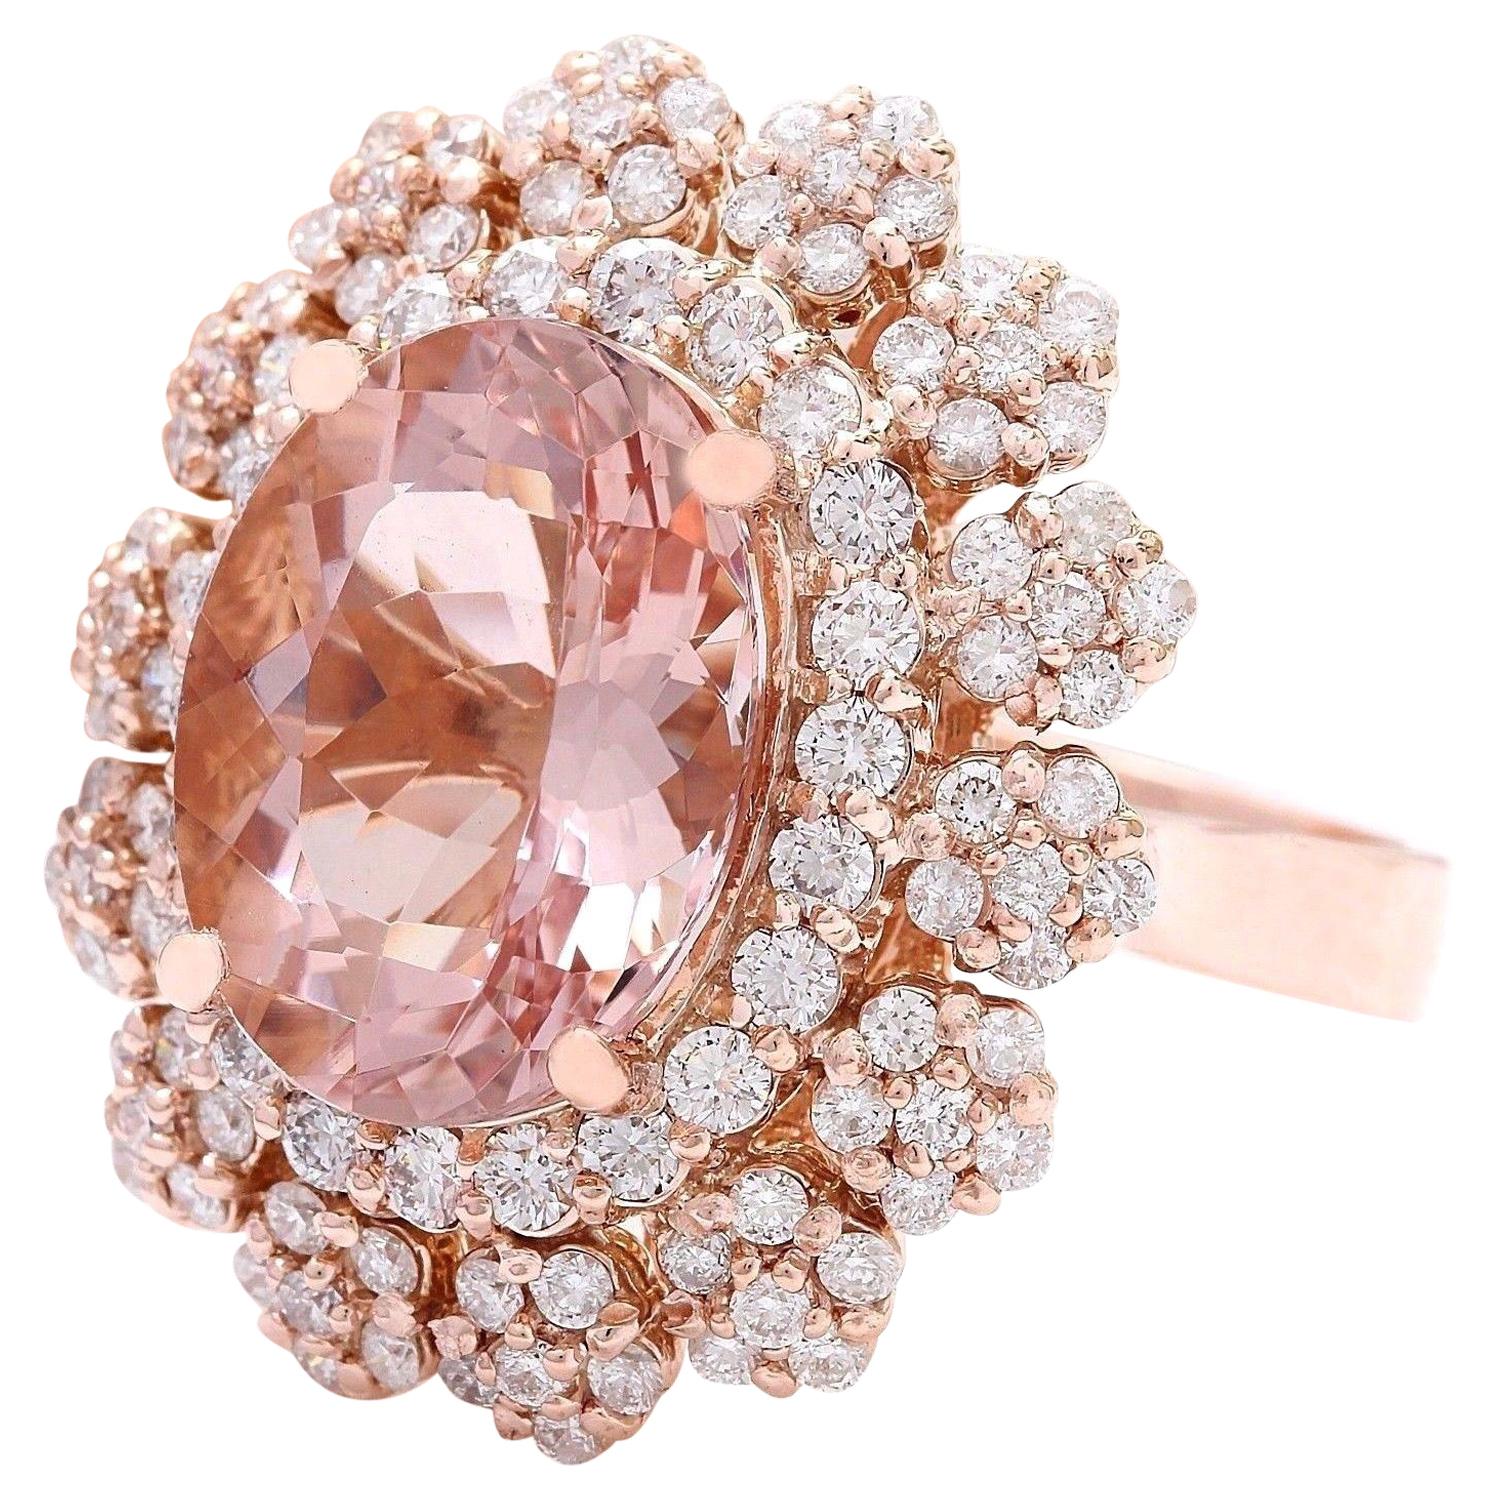 7.86 Carat Natural Morganite 14K Solid Rose Gold Diamond Ring
 Item Type: Ring
 Item Style: Cocktail
 Material: 14K Rose Gold
 Mainstone: Morganite
 Stone Color: Peach
 Stone Weight: 6.18 Carat
 Stone Shape: Oval
 Stone Quantity: 1
 Stone